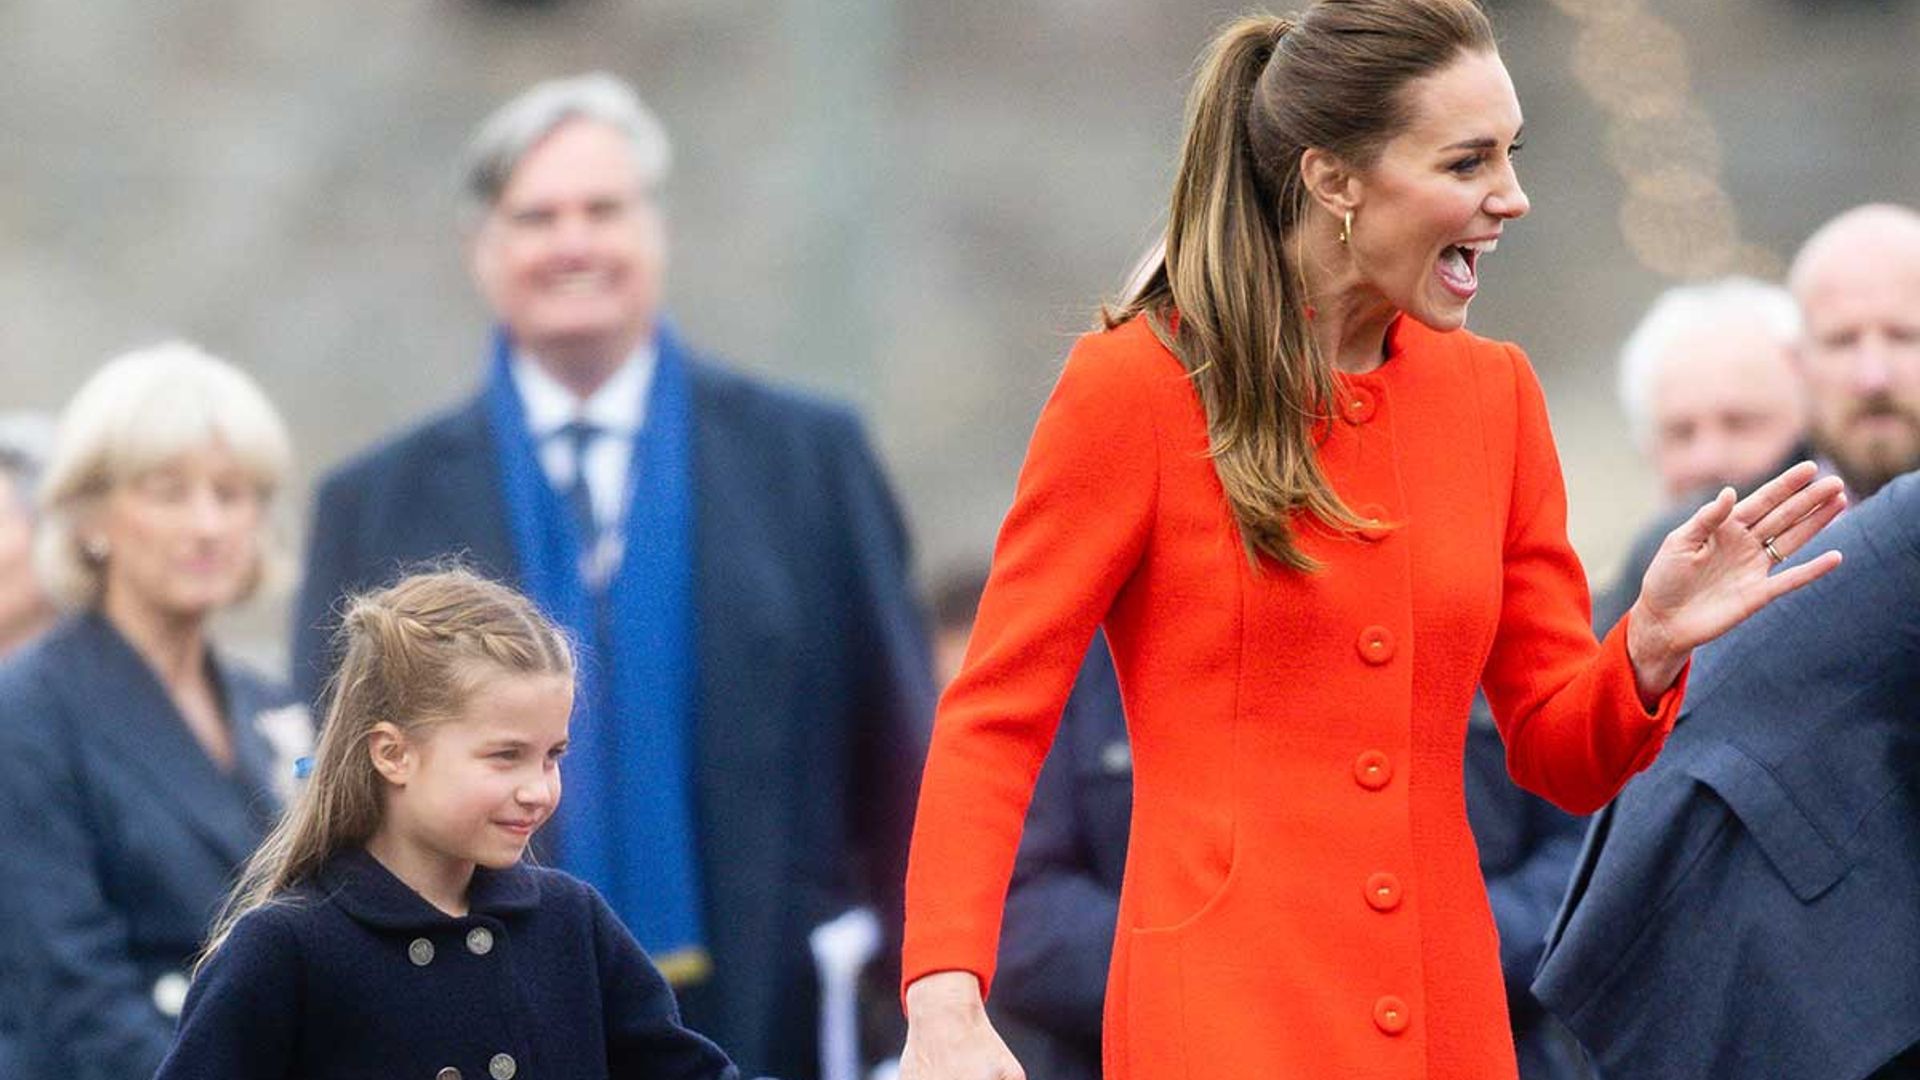 Princess Charlotte's Blonde Hair Sparks Controversy - wide 5